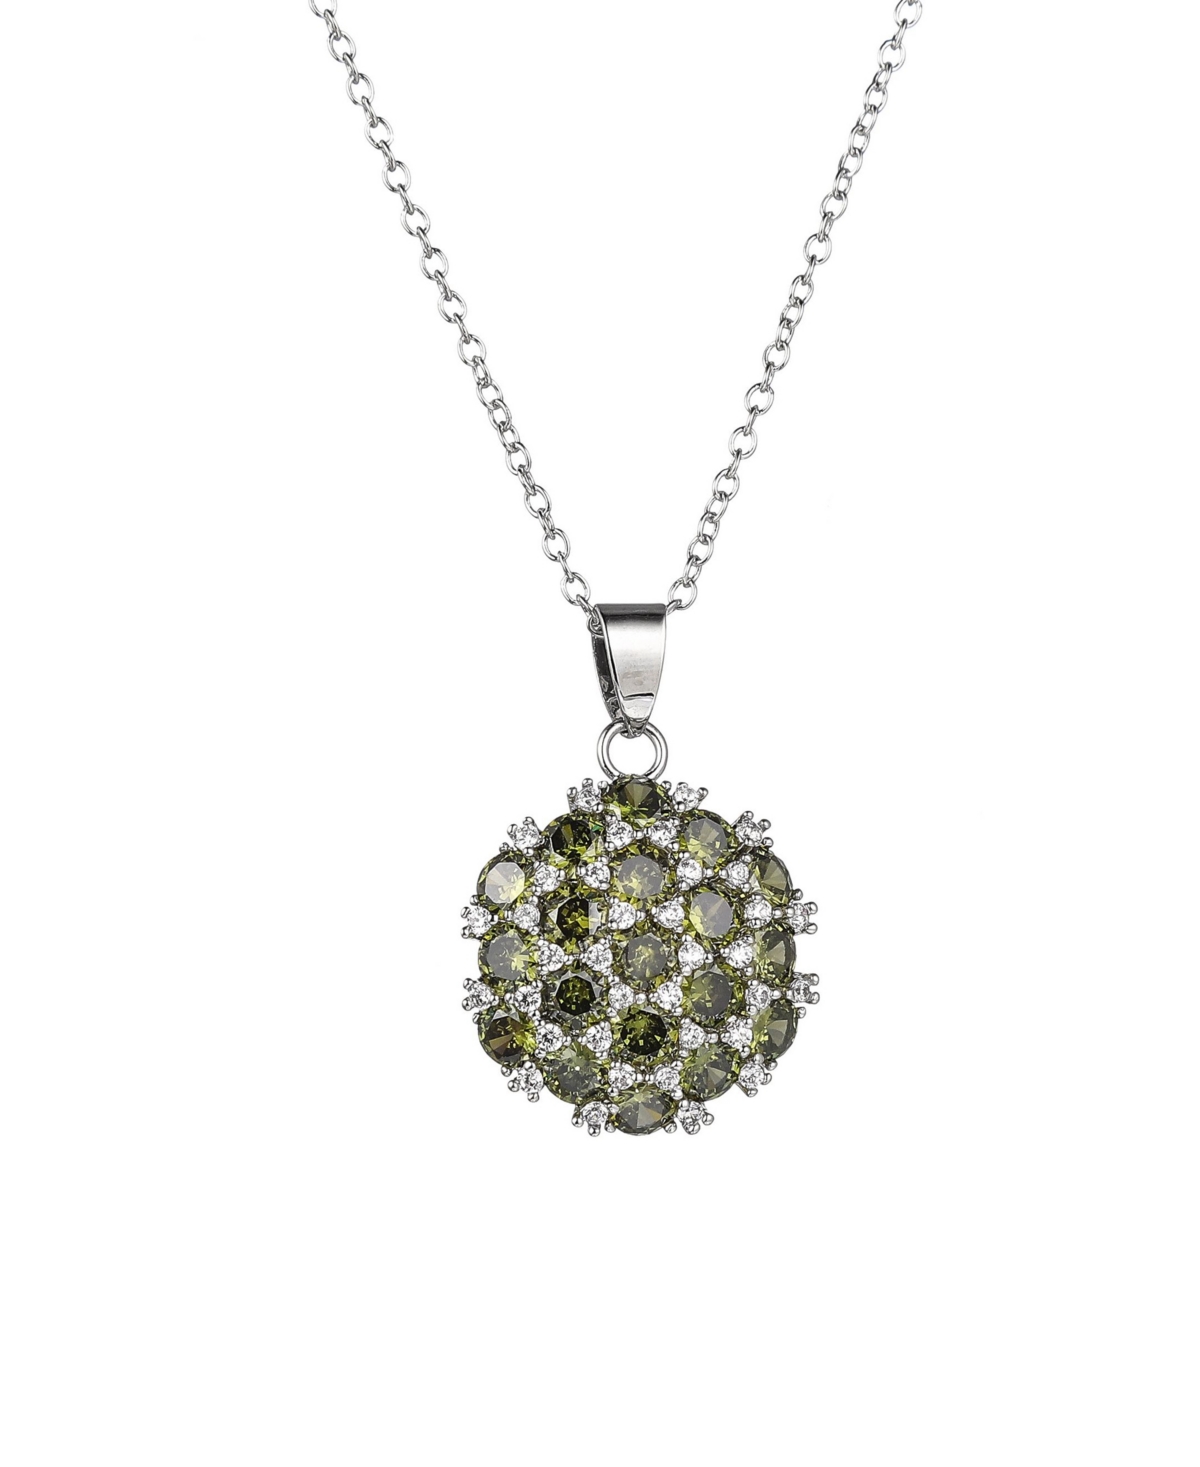 Silver-Tone Olive Flower Cluster Pendant Necklace - Silver-Tone